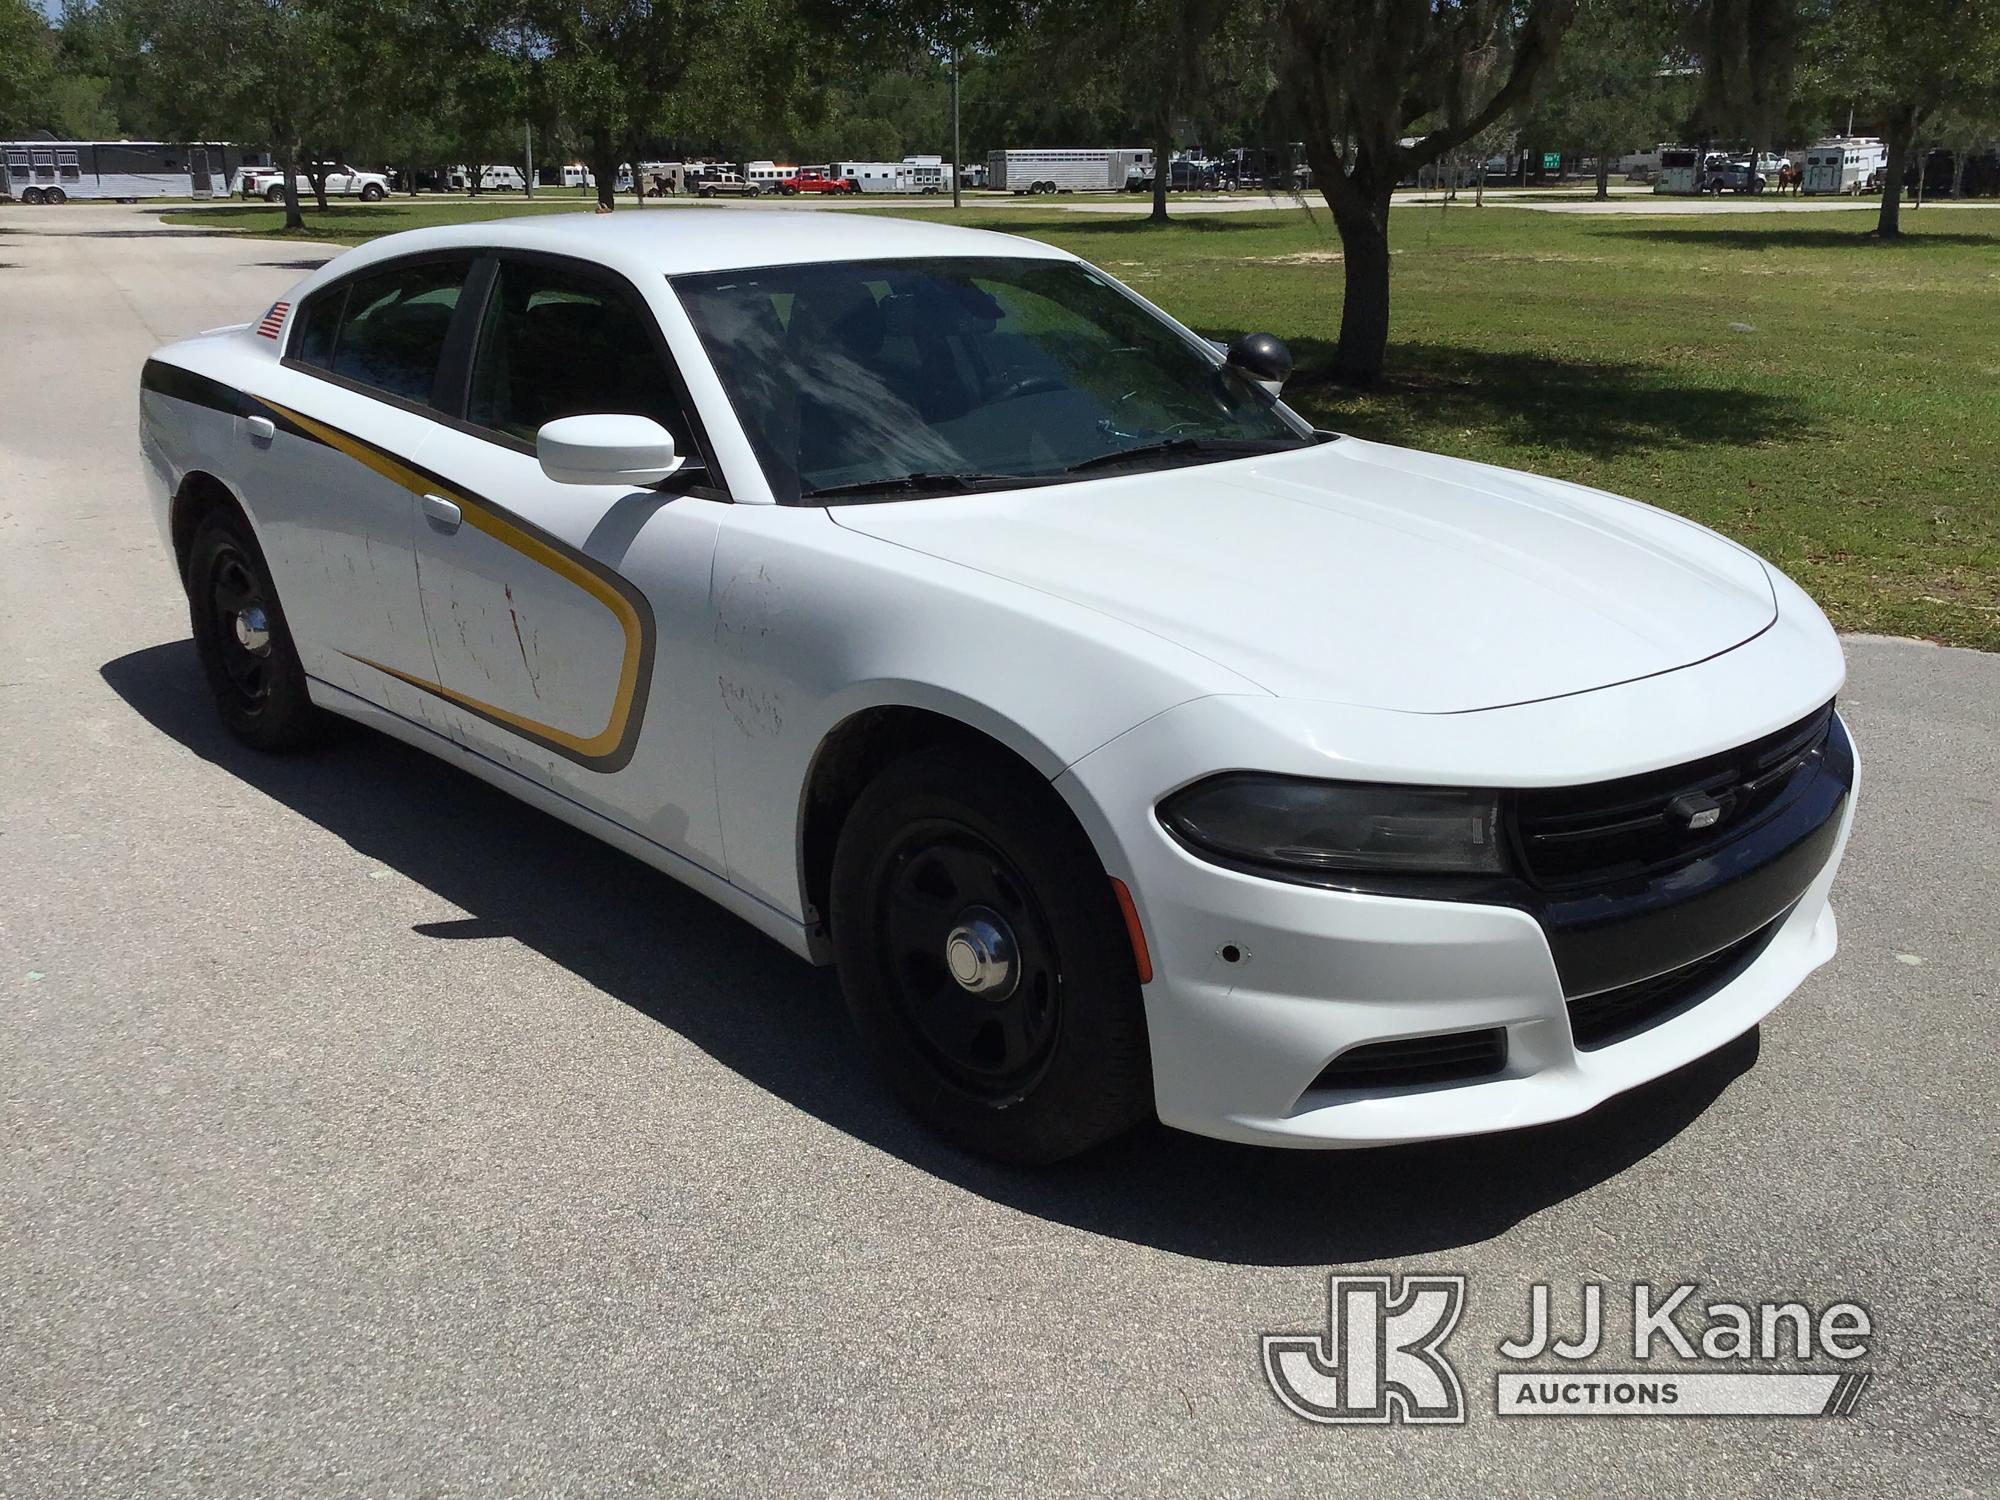 (Ocala, FL) 2016 Dodge Charger Police Package 4-Door Sedan, Municipal Owned Runs & Moves